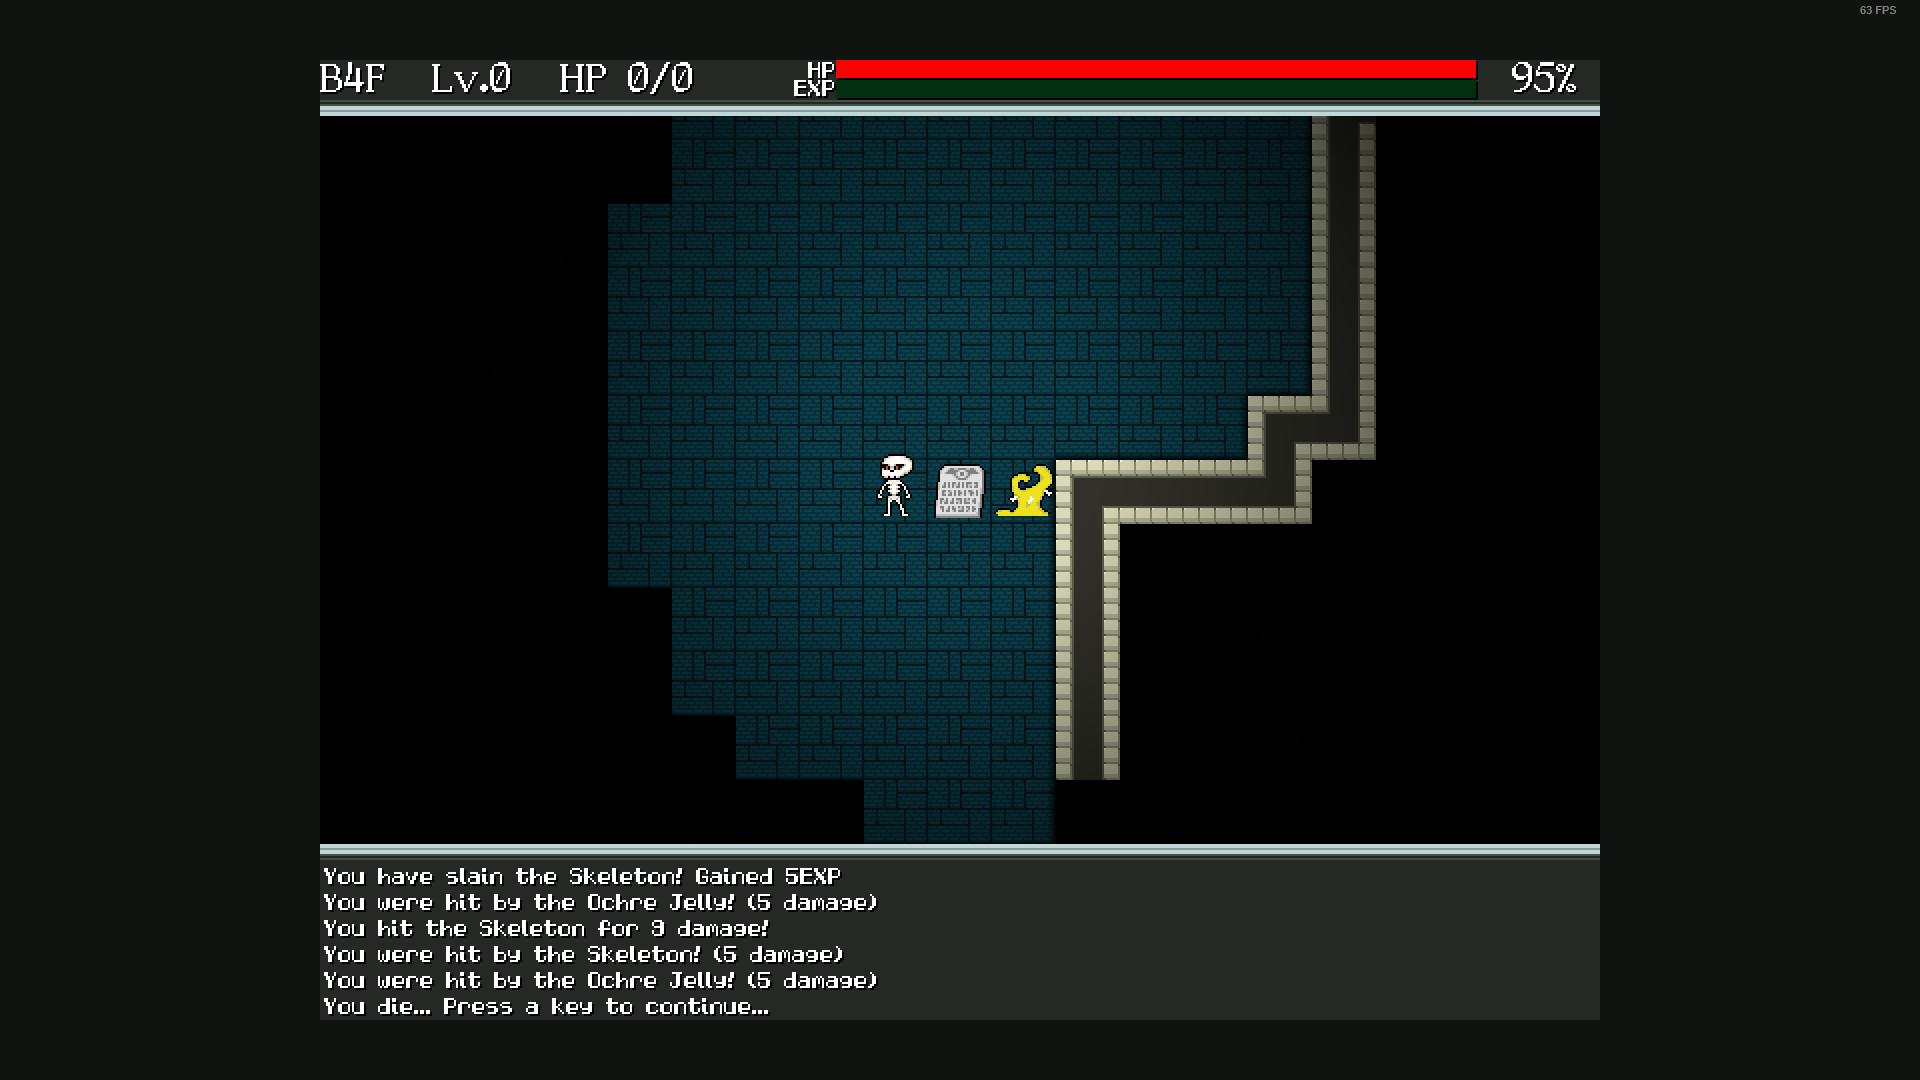 Screenshot №4 from game The Wizard's Lair